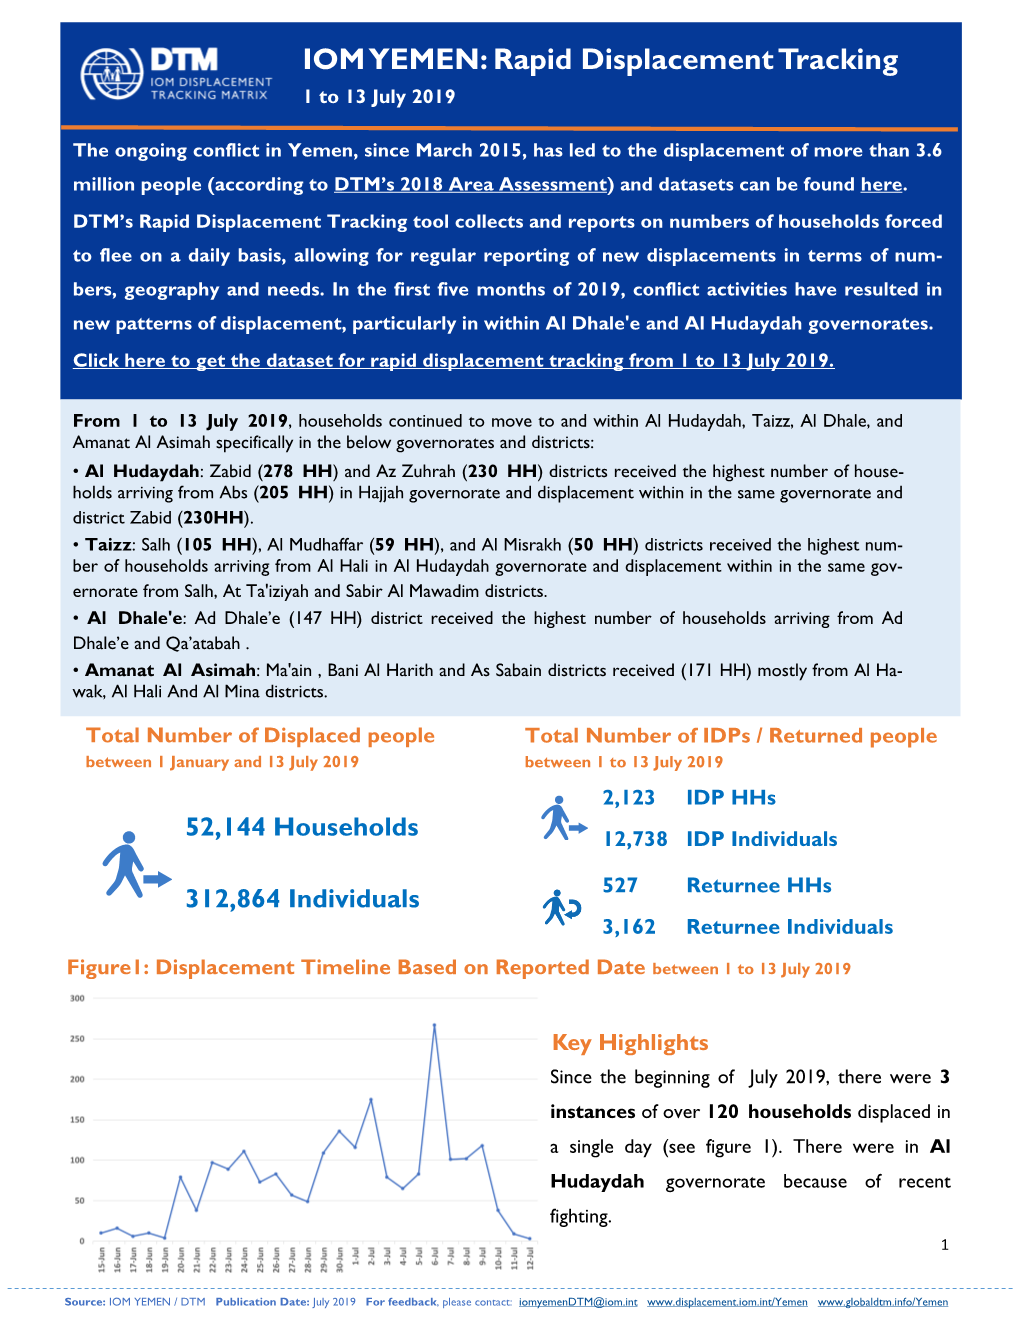 IOM YEMEN: Rapid Displacement Tracking 1 to 13 July 2019